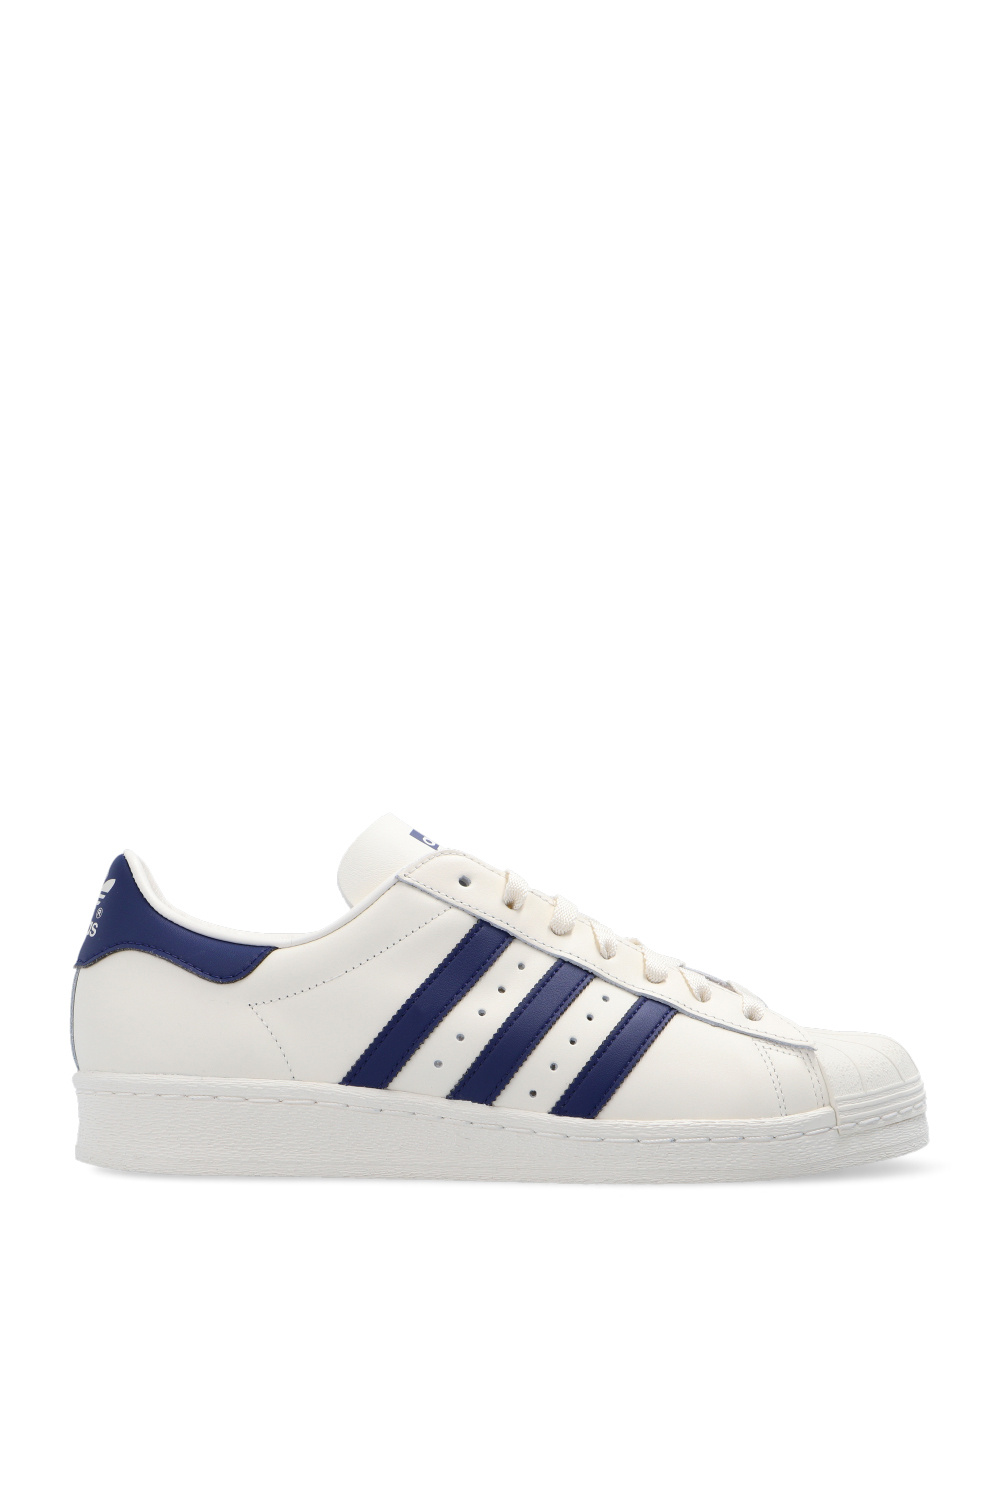 IetpShops | Men's Shoes | adidas unidays outlet list in india store | ADIDAS Originals 82' sneakers